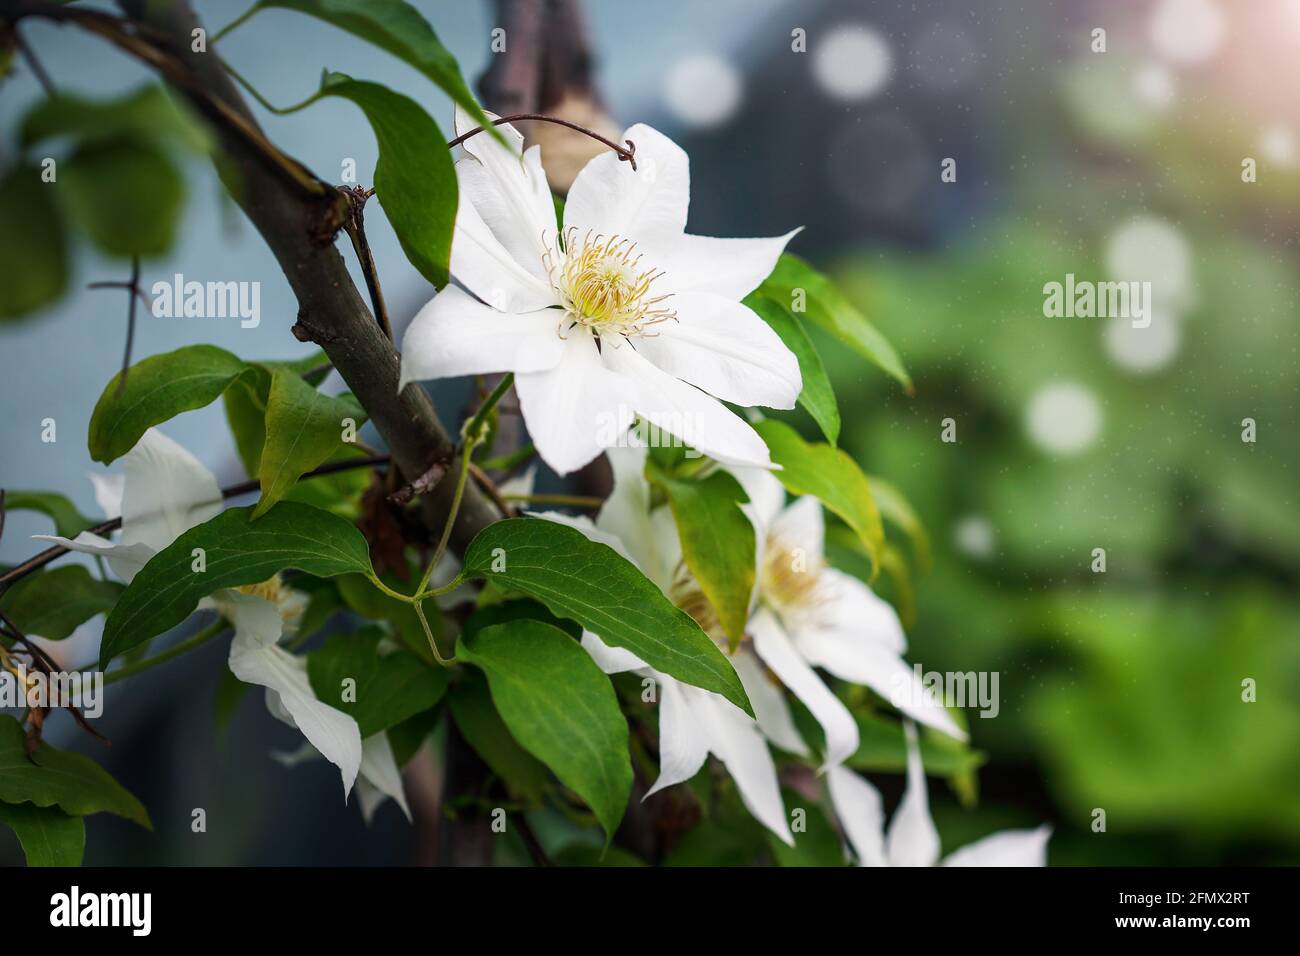 Beautiful white flower blossoms of Clematis 'Hyde Hall' flowering among foliage and stems over a homemade trellis in the garden. Selective focus. Stock Photo